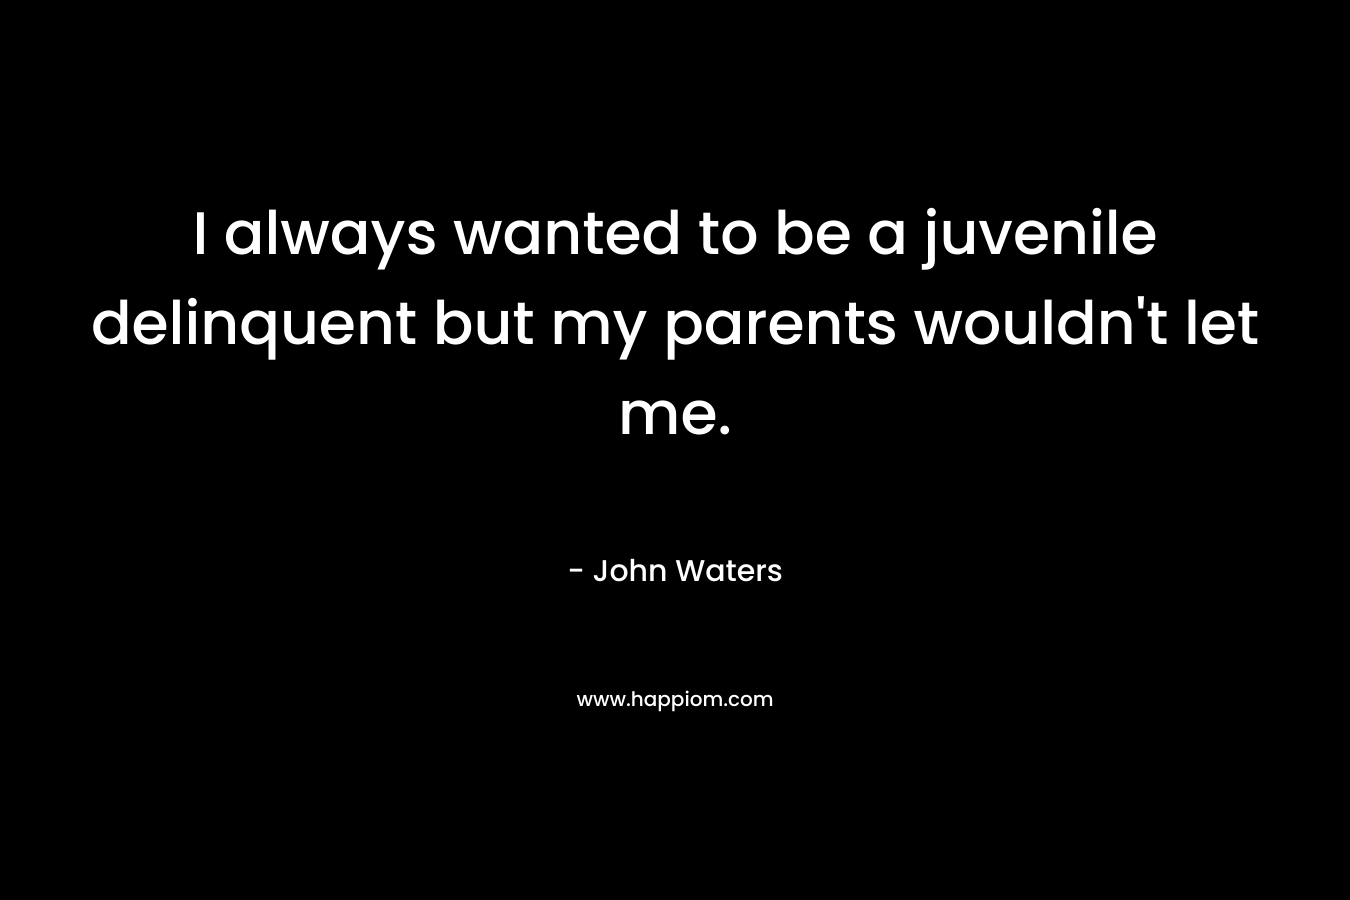 I always wanted to be a juvenile delinquent but my parents wouldn't let me.